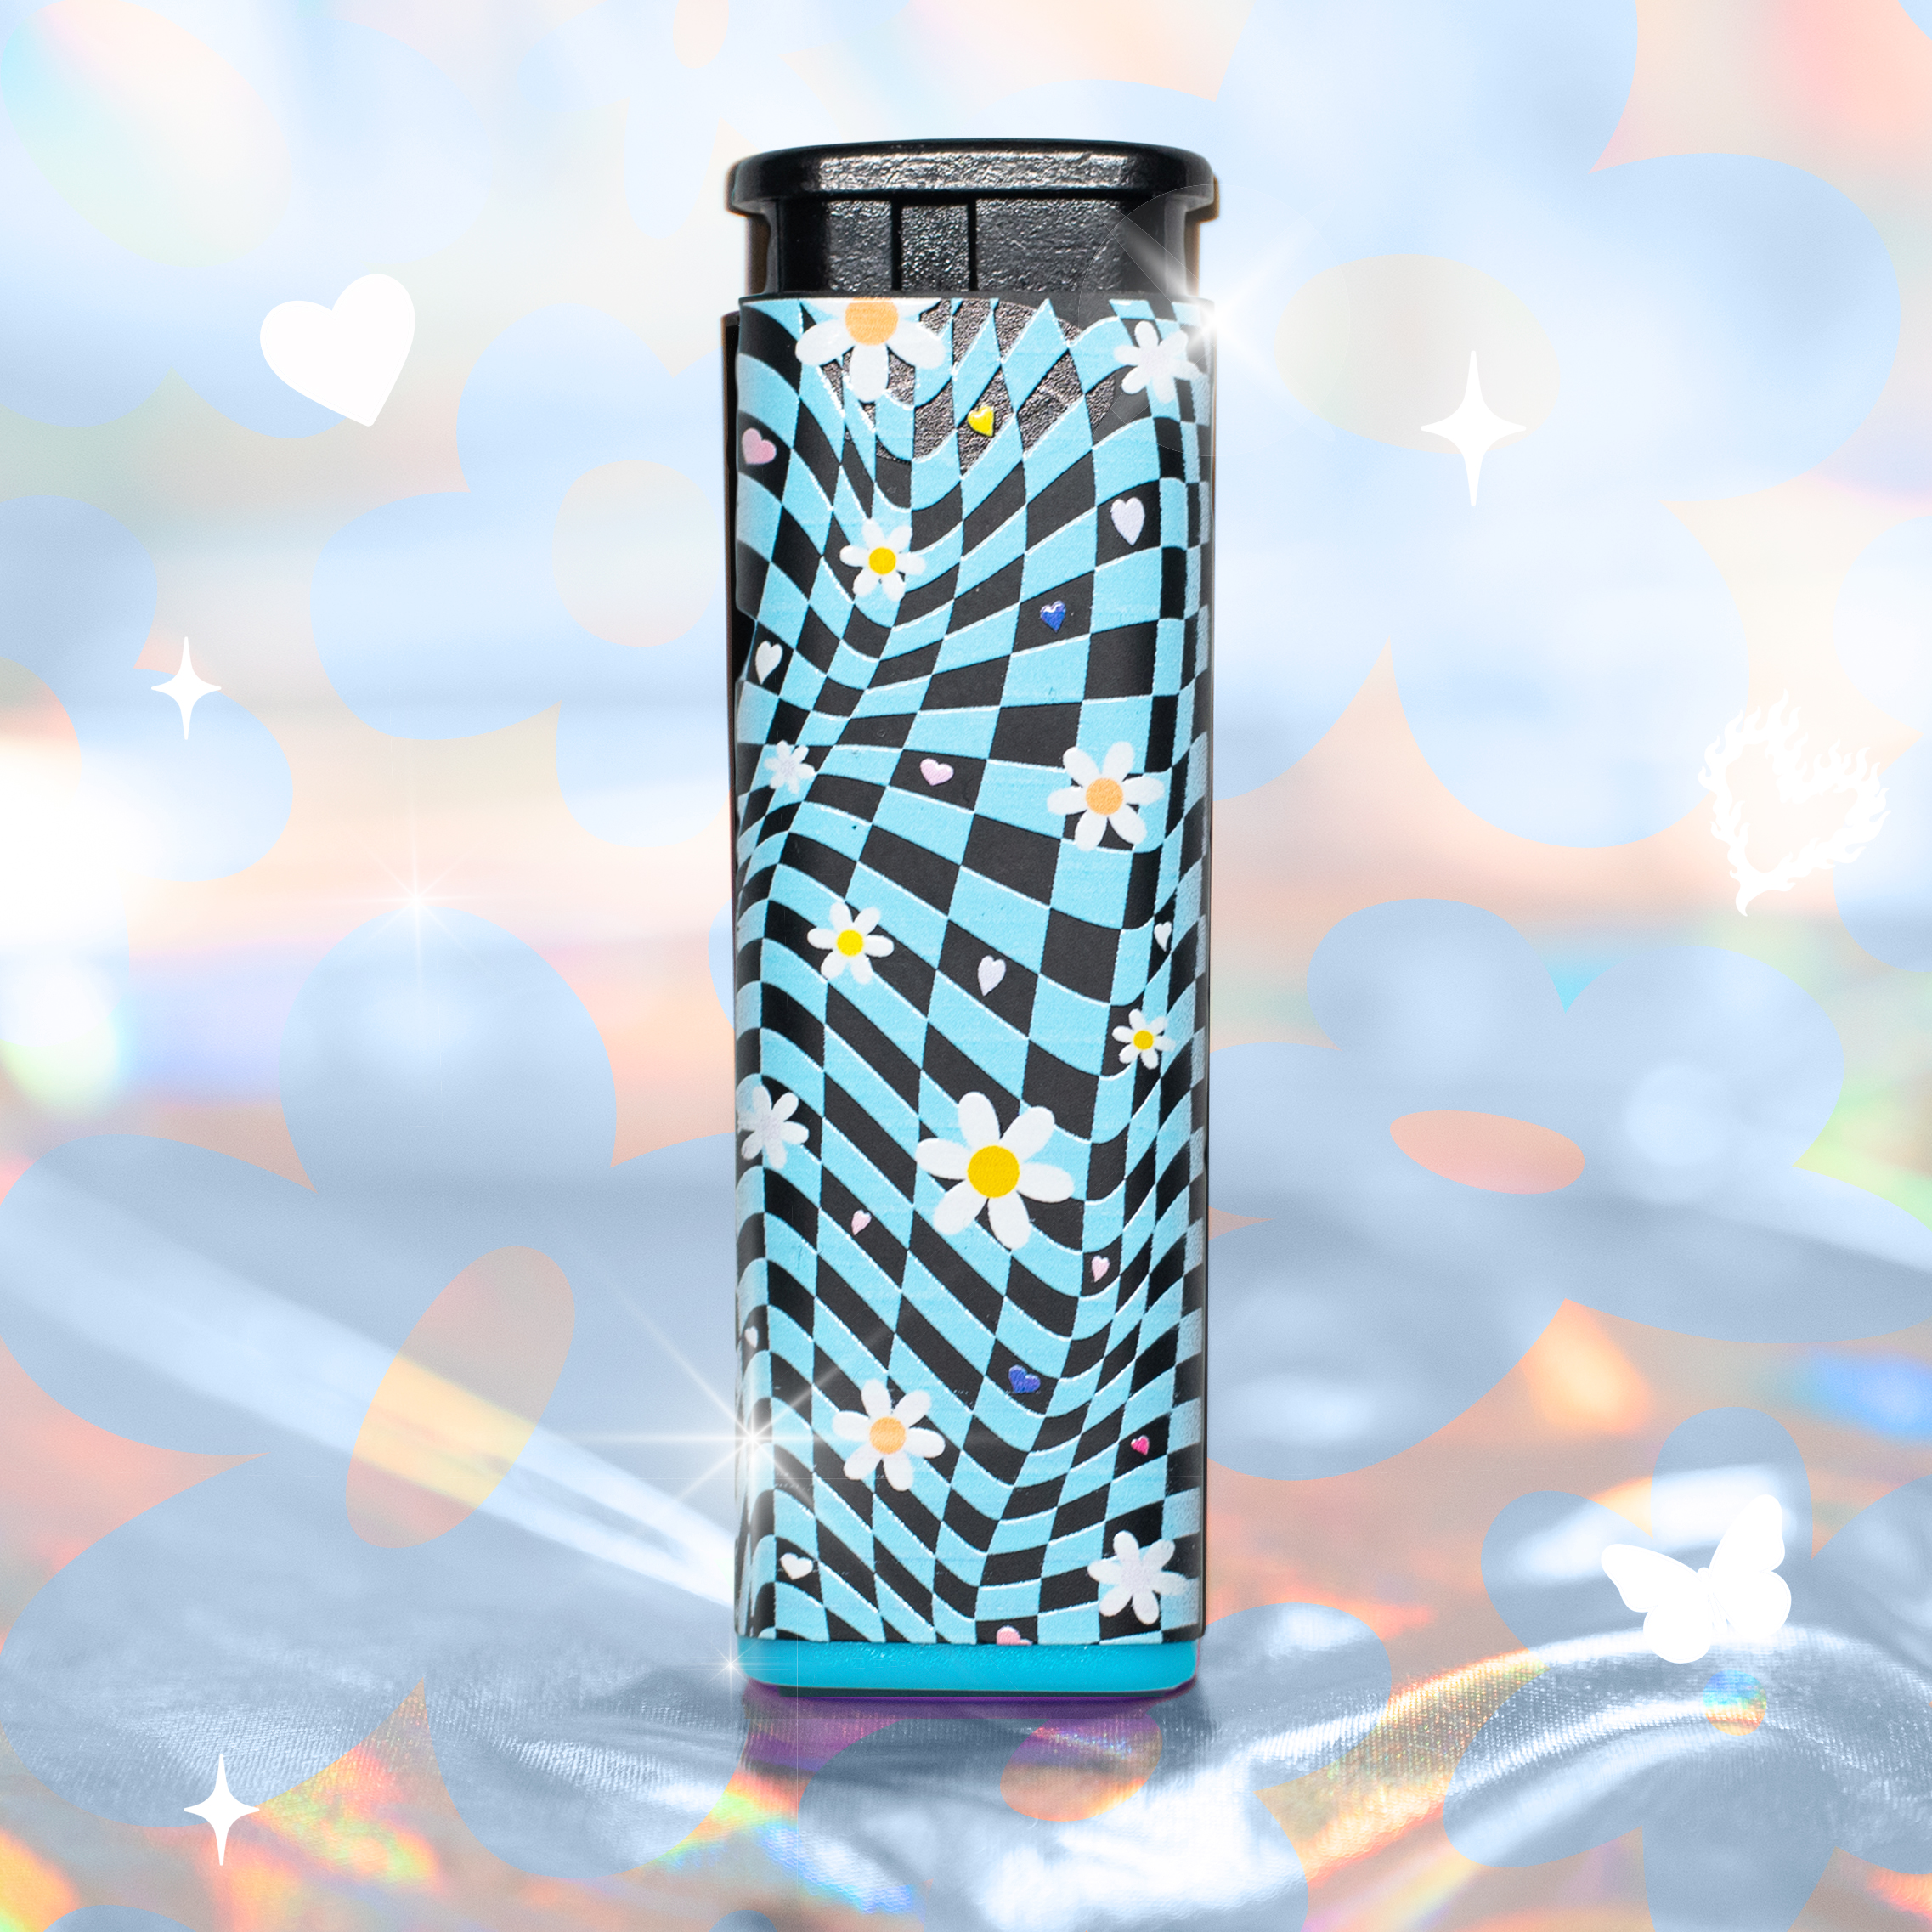 High Quality Lighters - The Blue Daisy Chain Lighter